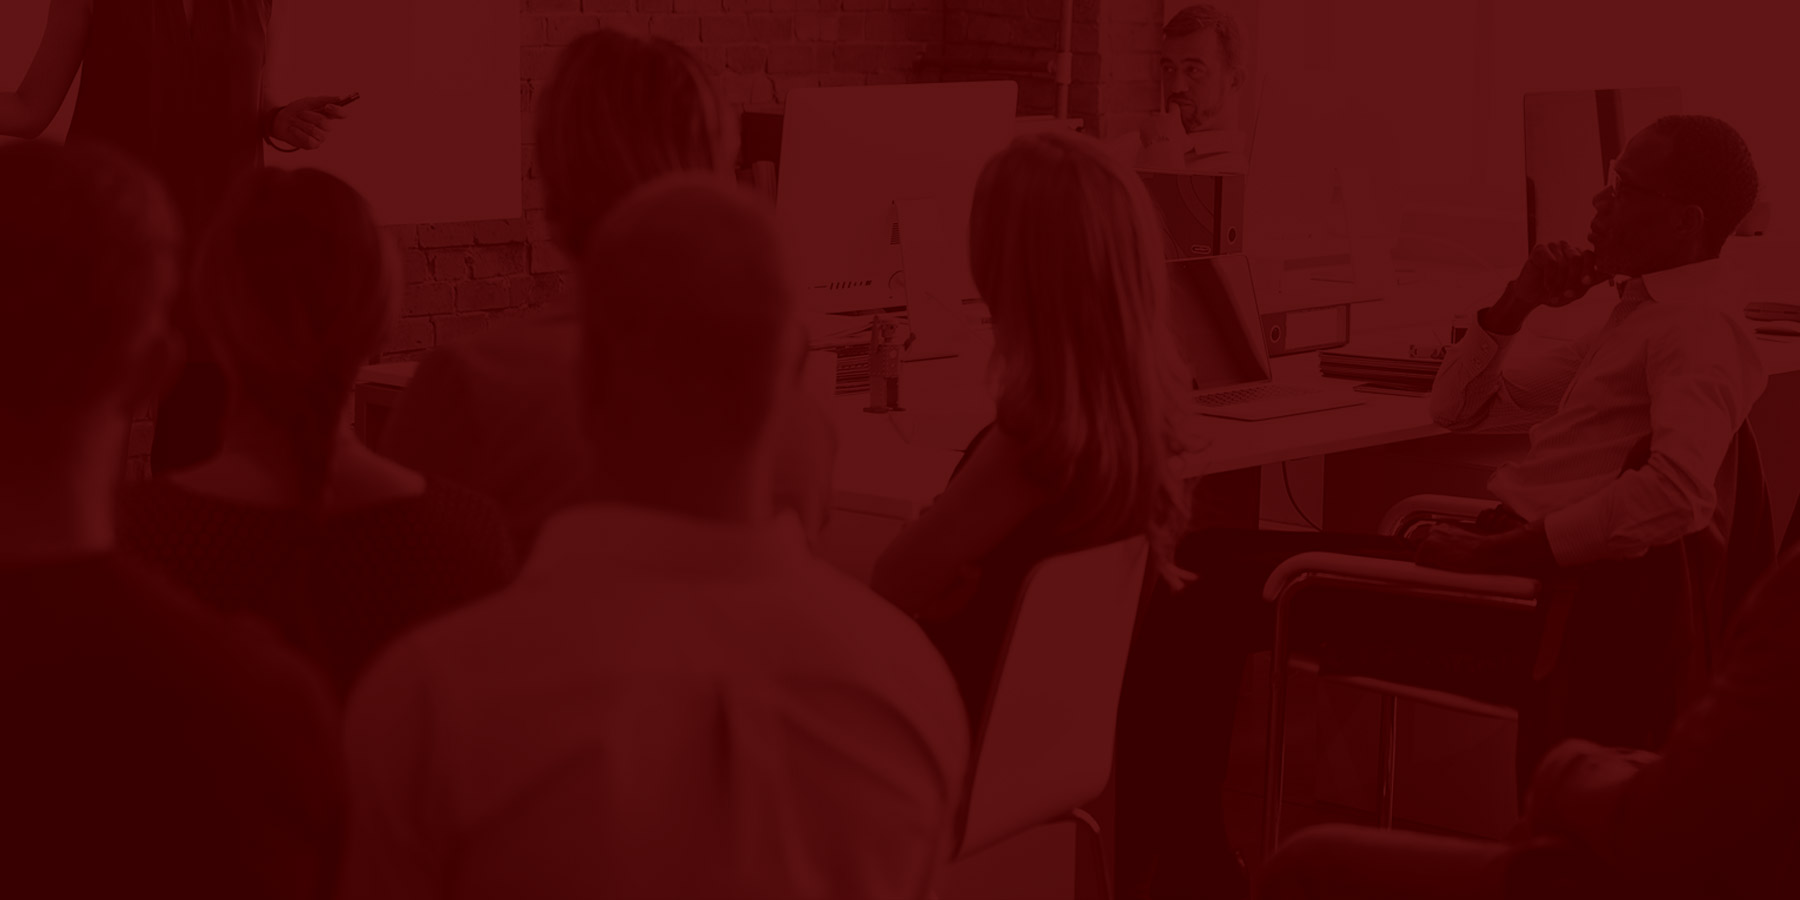 group of individuals sitting in a classroom listening to a presentation. Image is overlaid in maroon